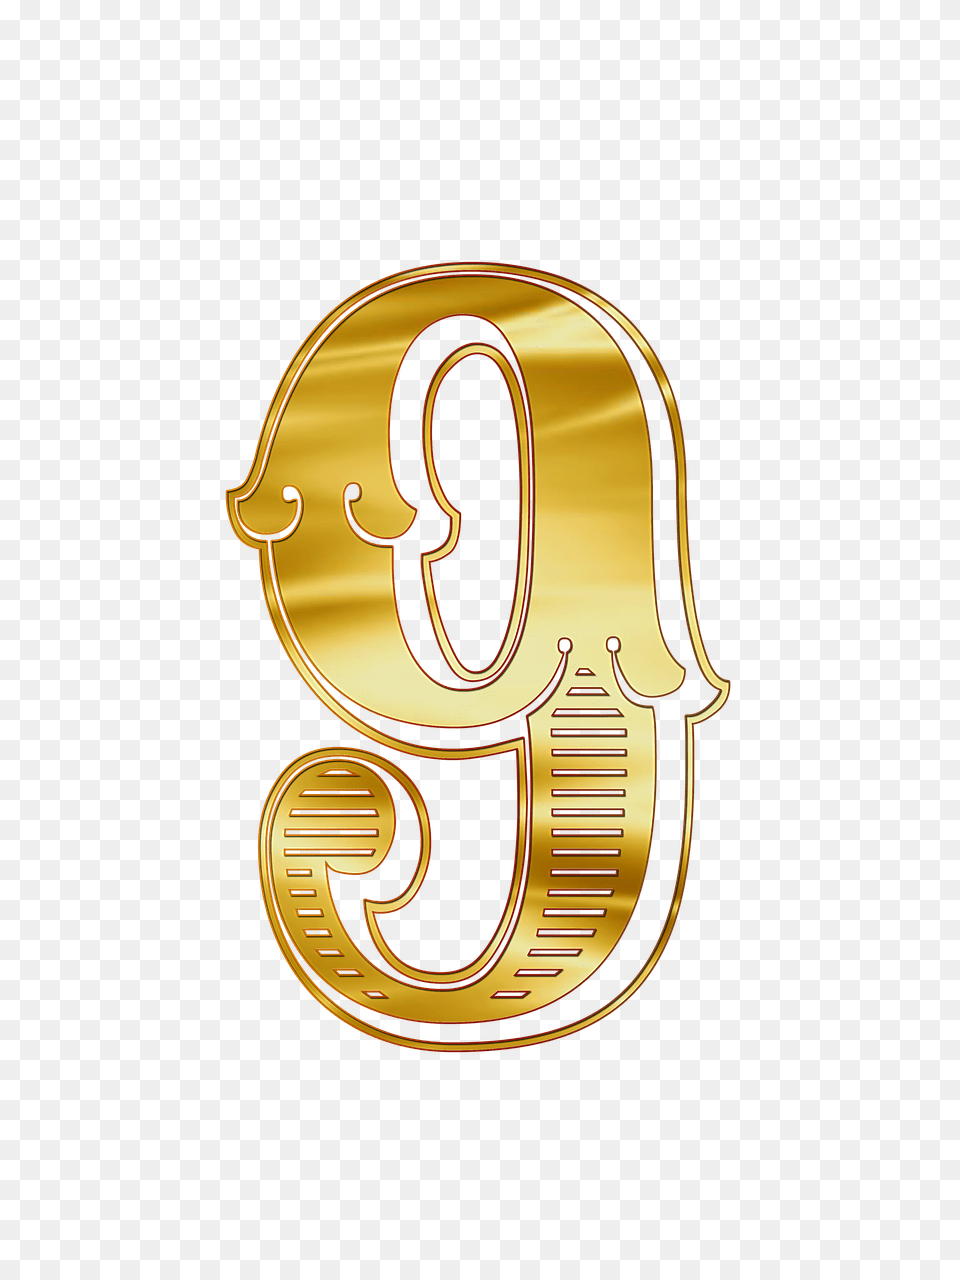 Number 9 Guilded, Symbol, Text, Smoke Pipe Png